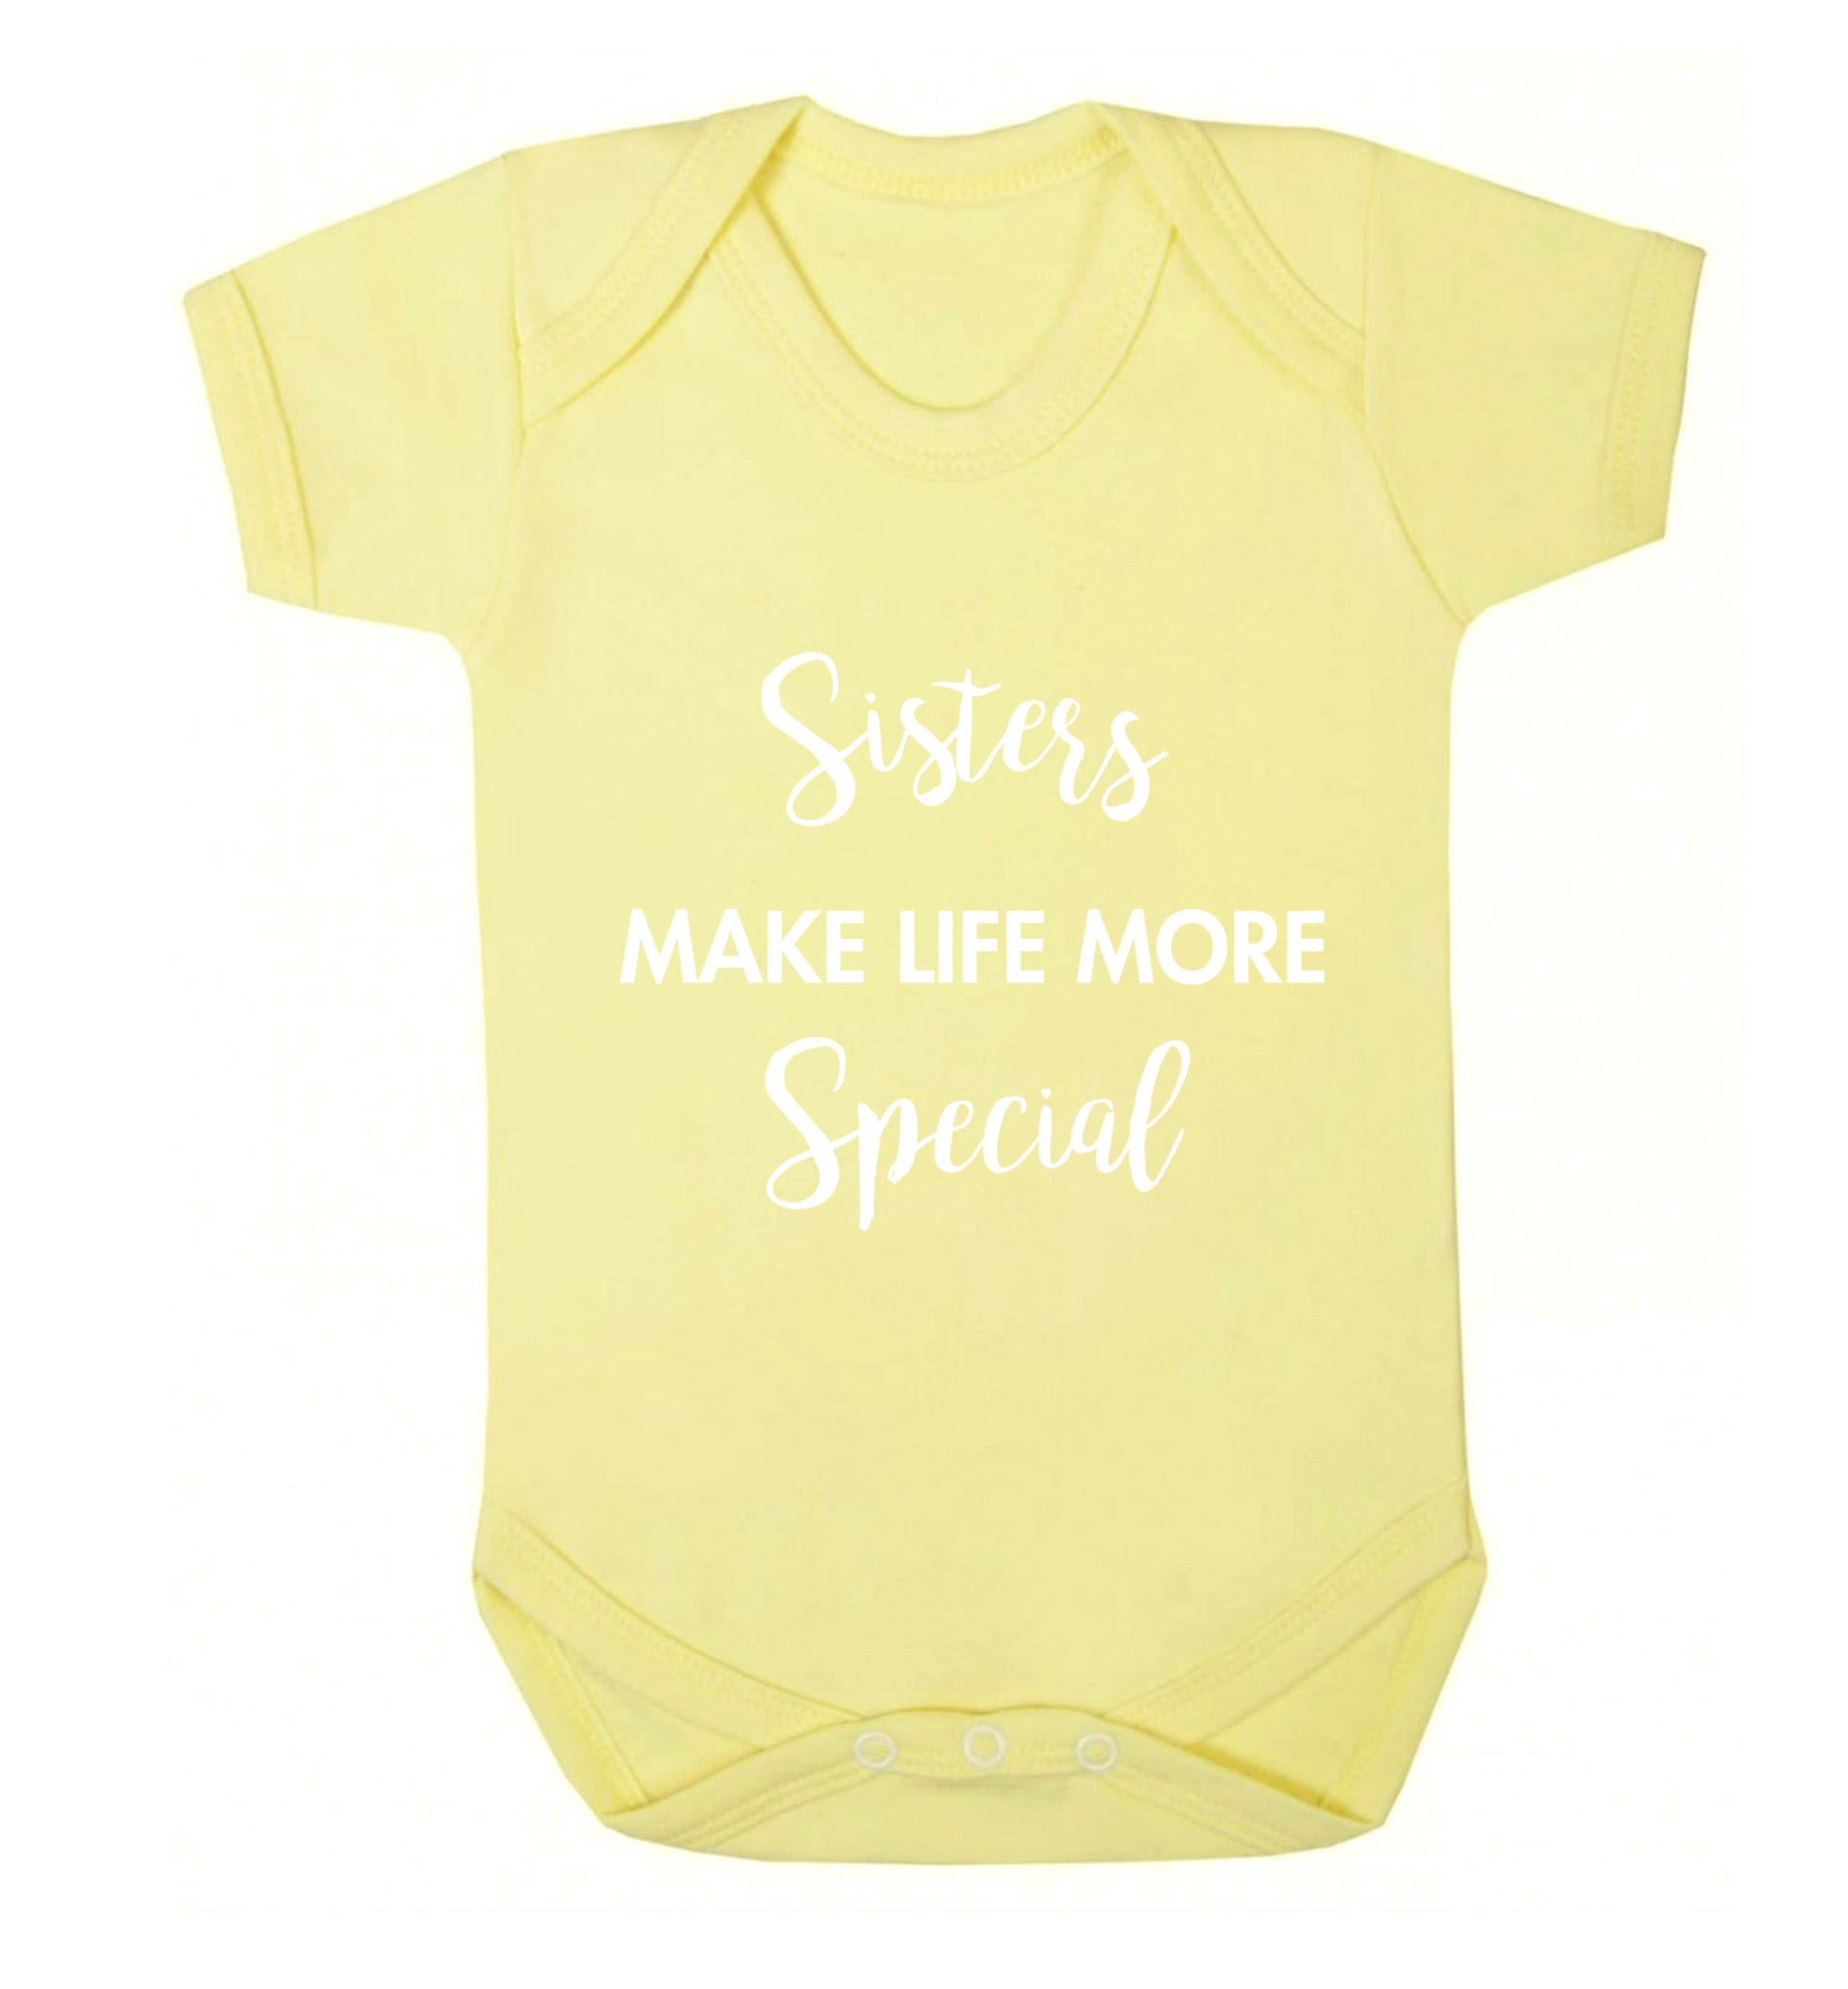 Sisters make life more special Baby Vest pale yellow 18-24 months